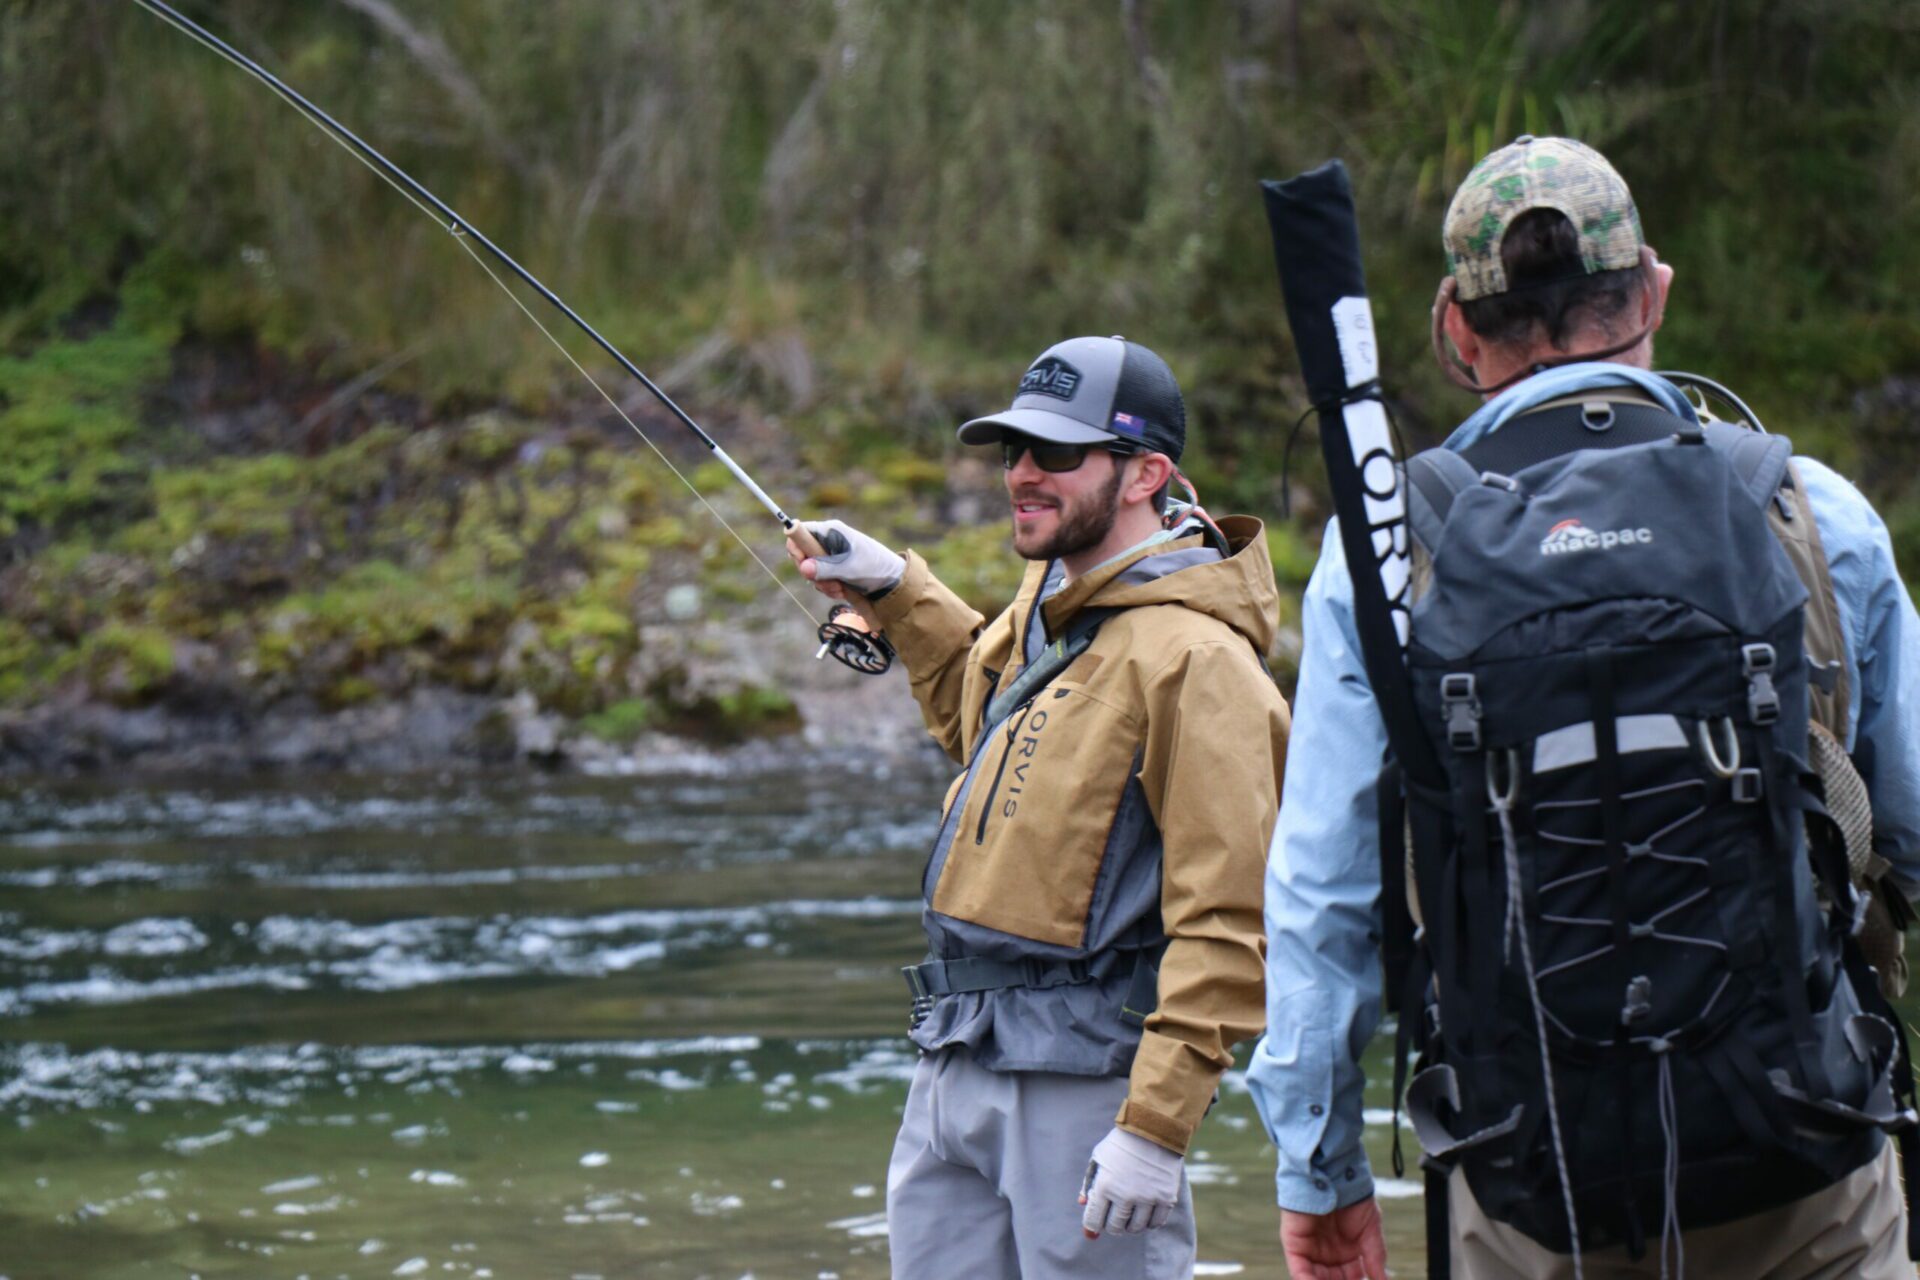 At Orvis Endorsed Fly Fishing Guides, we only use the best quality equipment to ensure a successful fishing day.